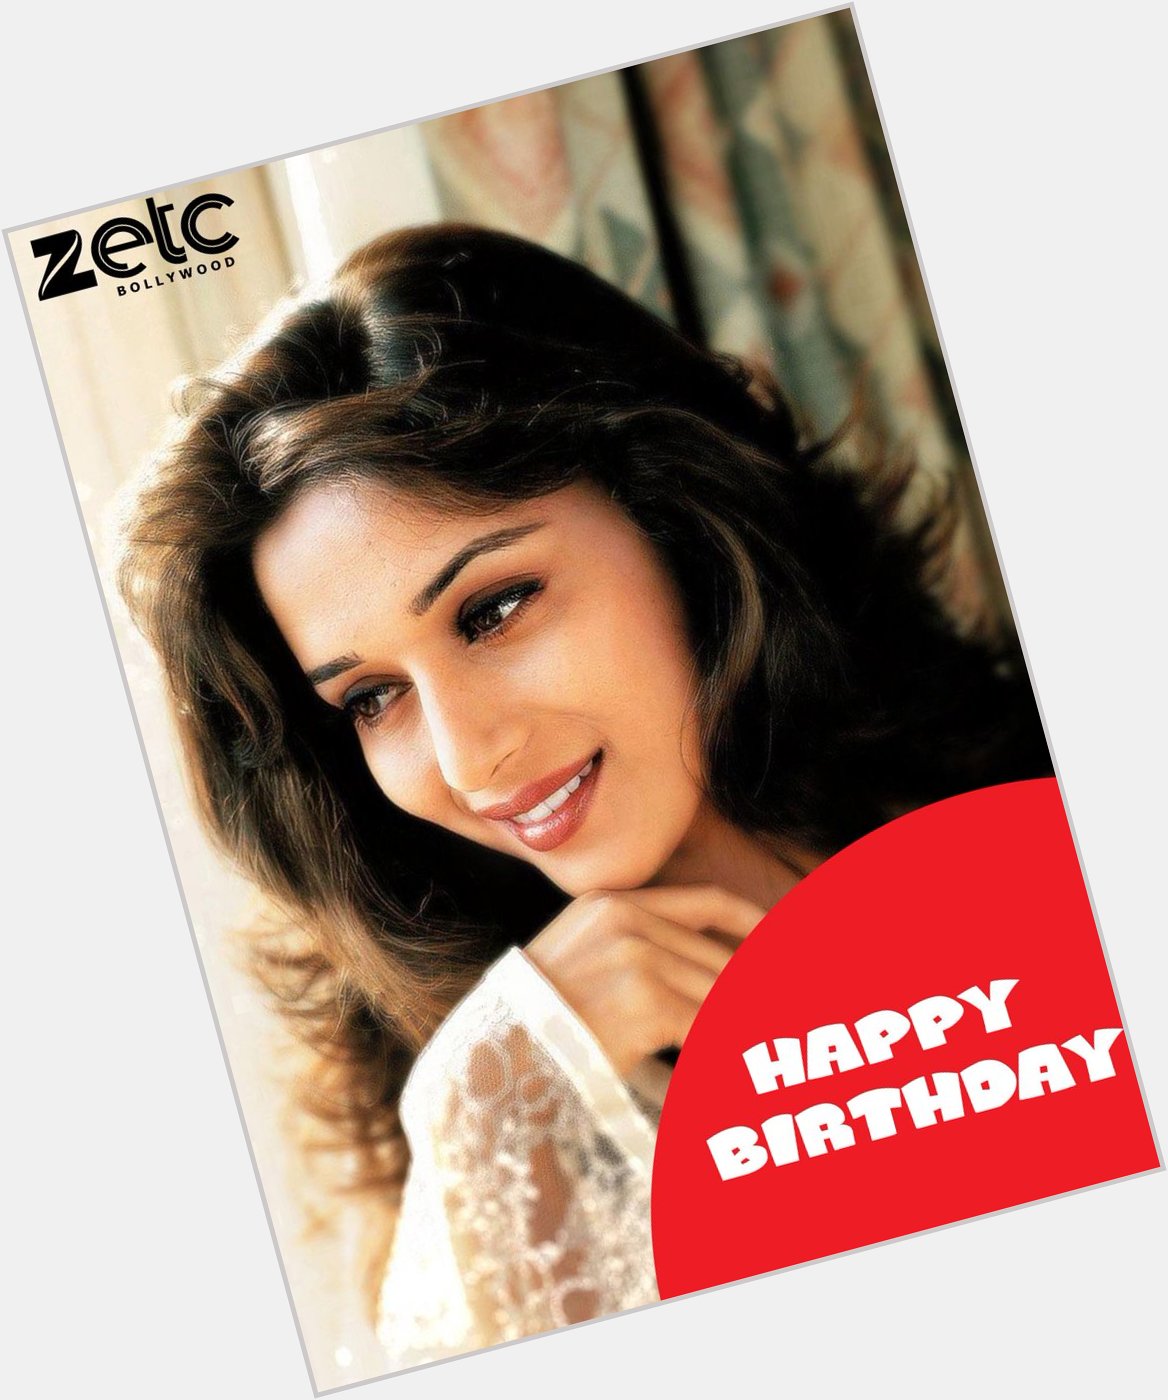 Happy  birthday  my  favourite  star  
Keep  your  smile  continue # madhuri  dixit    